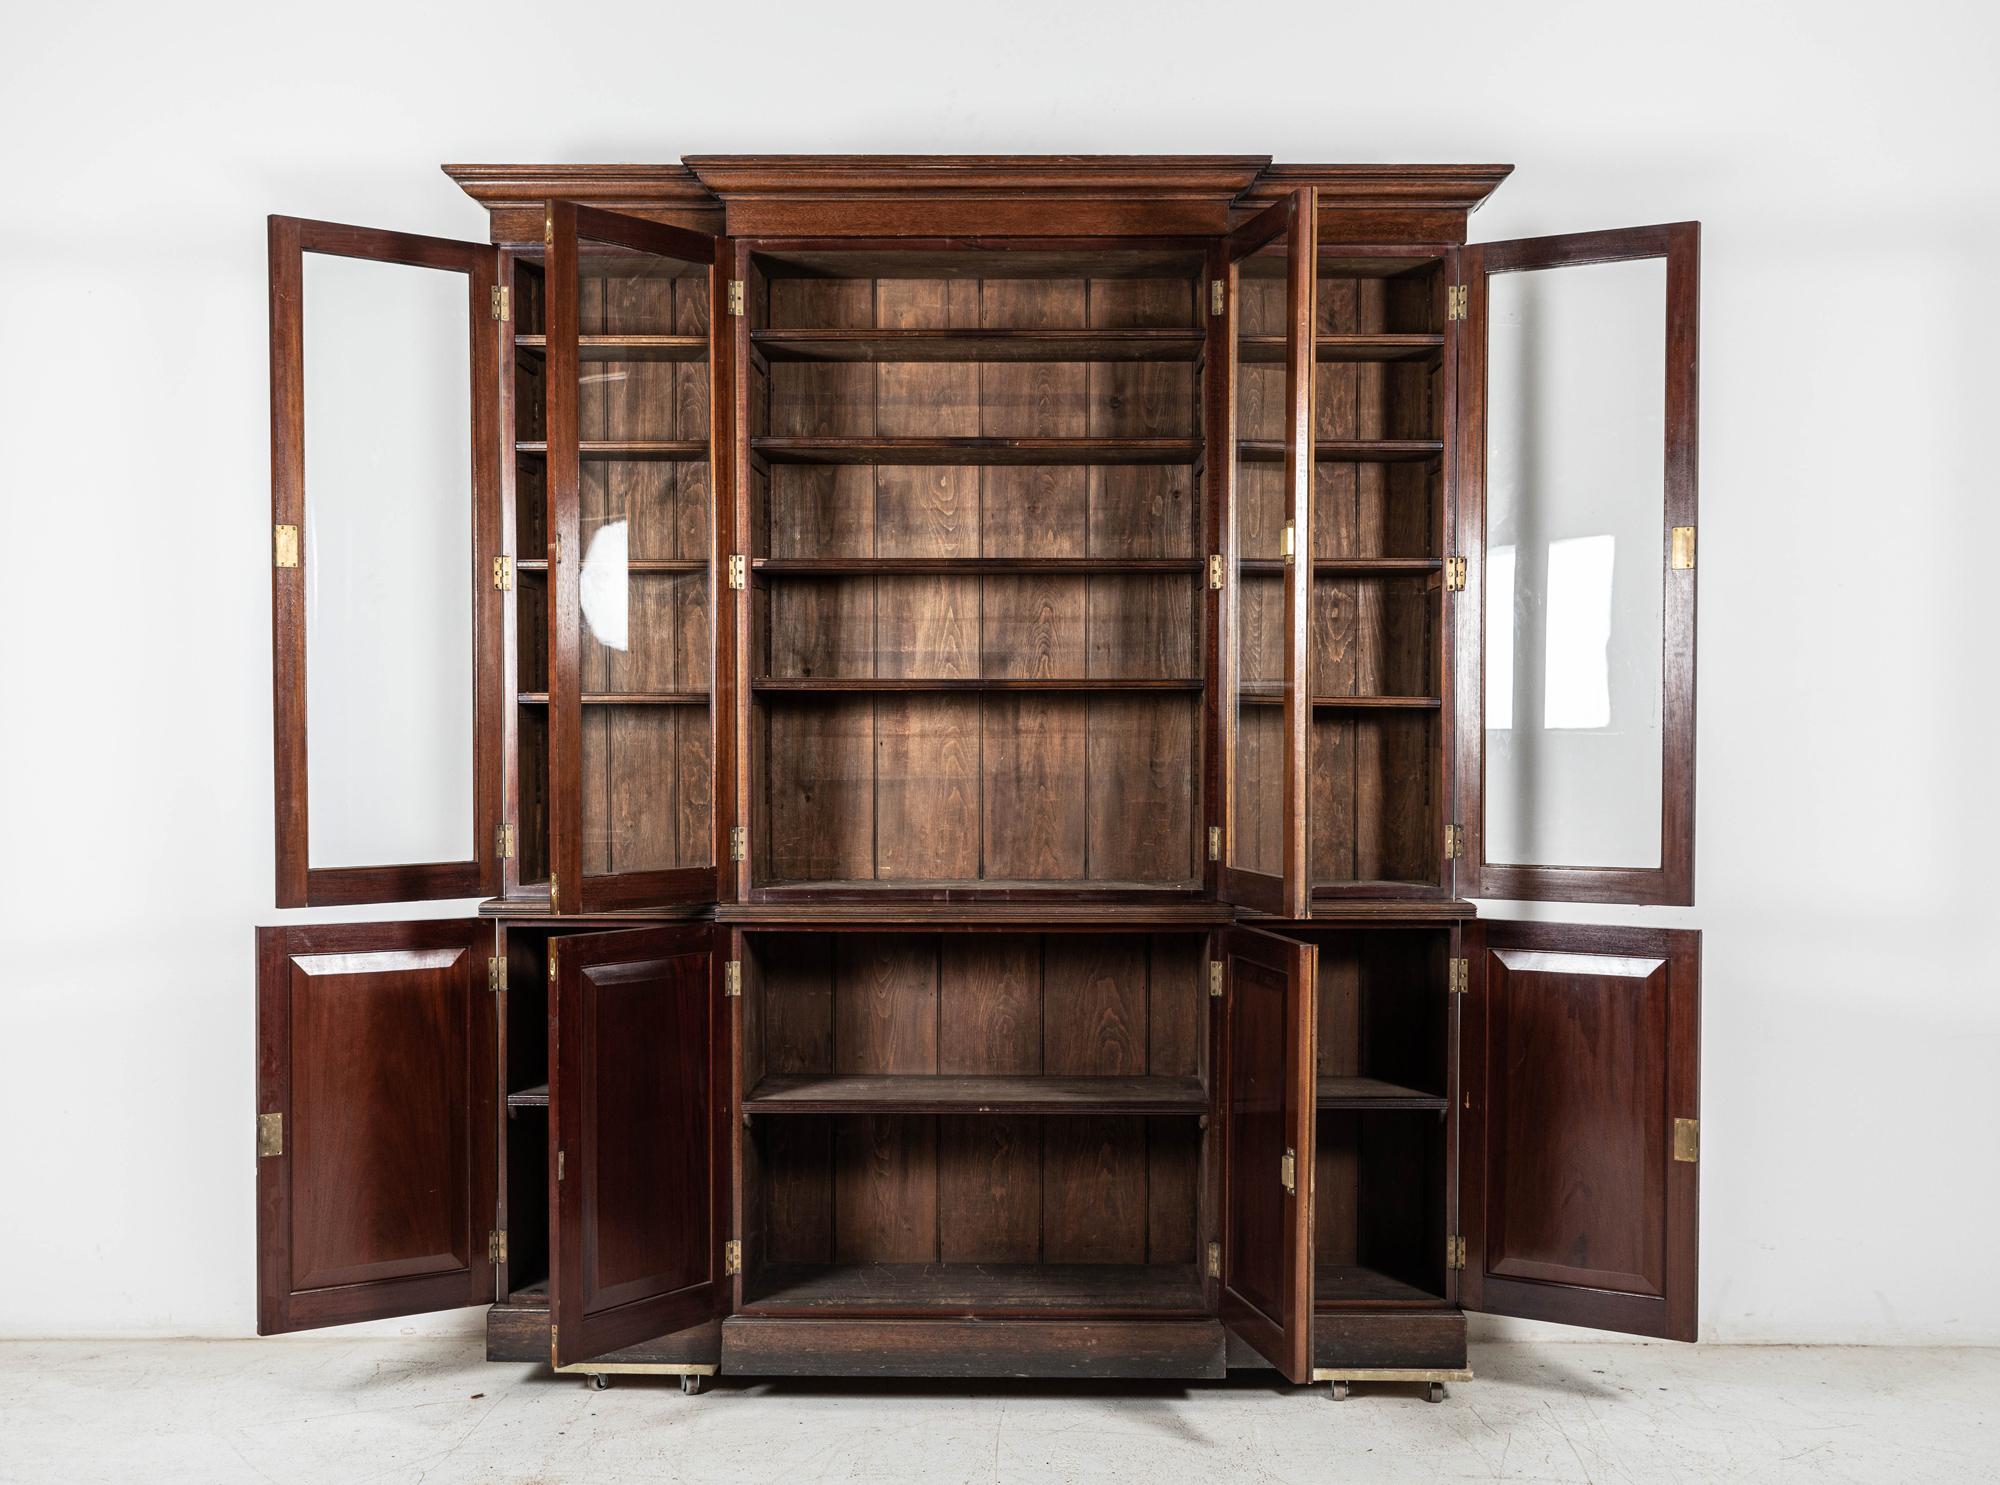 Circa 1890

19thC Glazed Mahogany Breakfront Bookcase

The projecting cornice above four glazed cupboard doors, enclosing adjustable shelves, above a base section with four fielded panel doors, raised on a plinth

sku 897B

H226 x W200 x D44 cm

Top